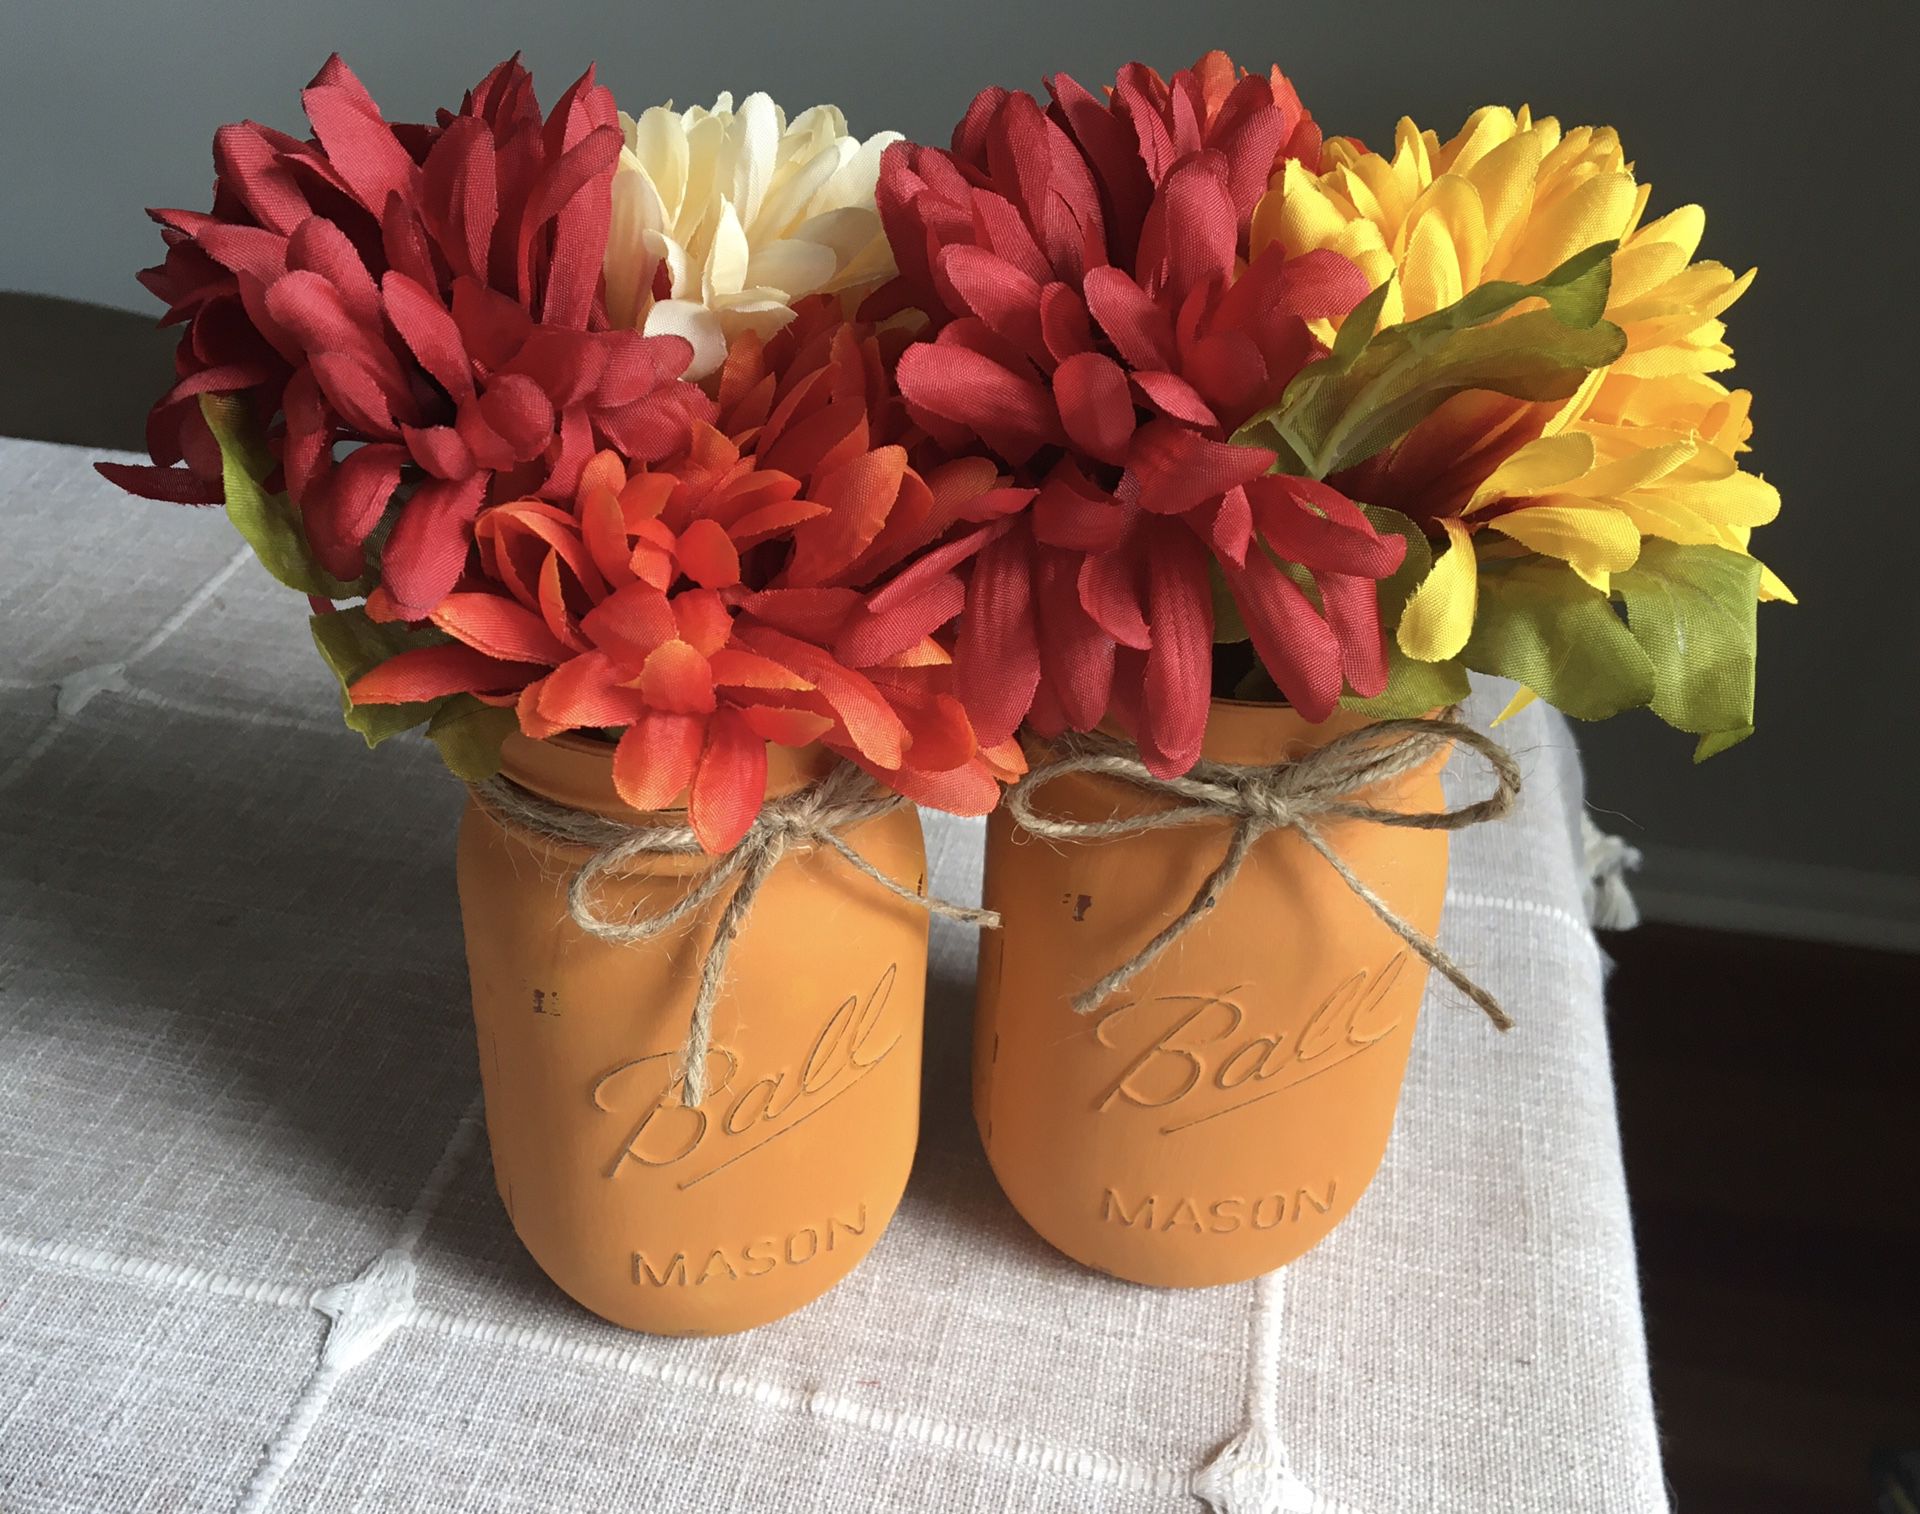 Distressed mason jar vases with flowers included!! Jar/flower choices shown in photos